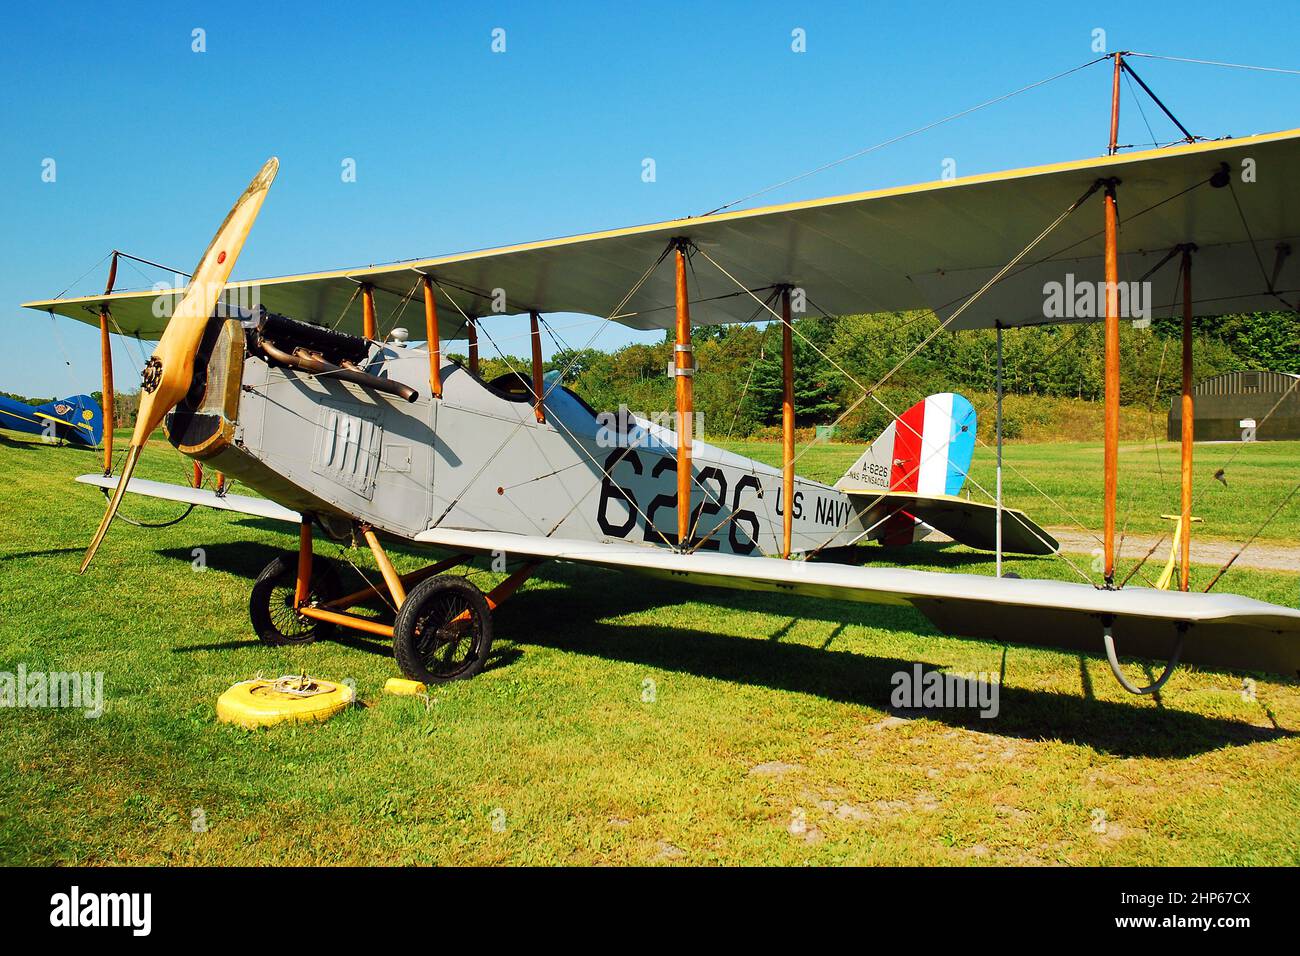 A Curtiss JN 4H 1 is on display at the Rhinebeck Aerodrome Stock Photo